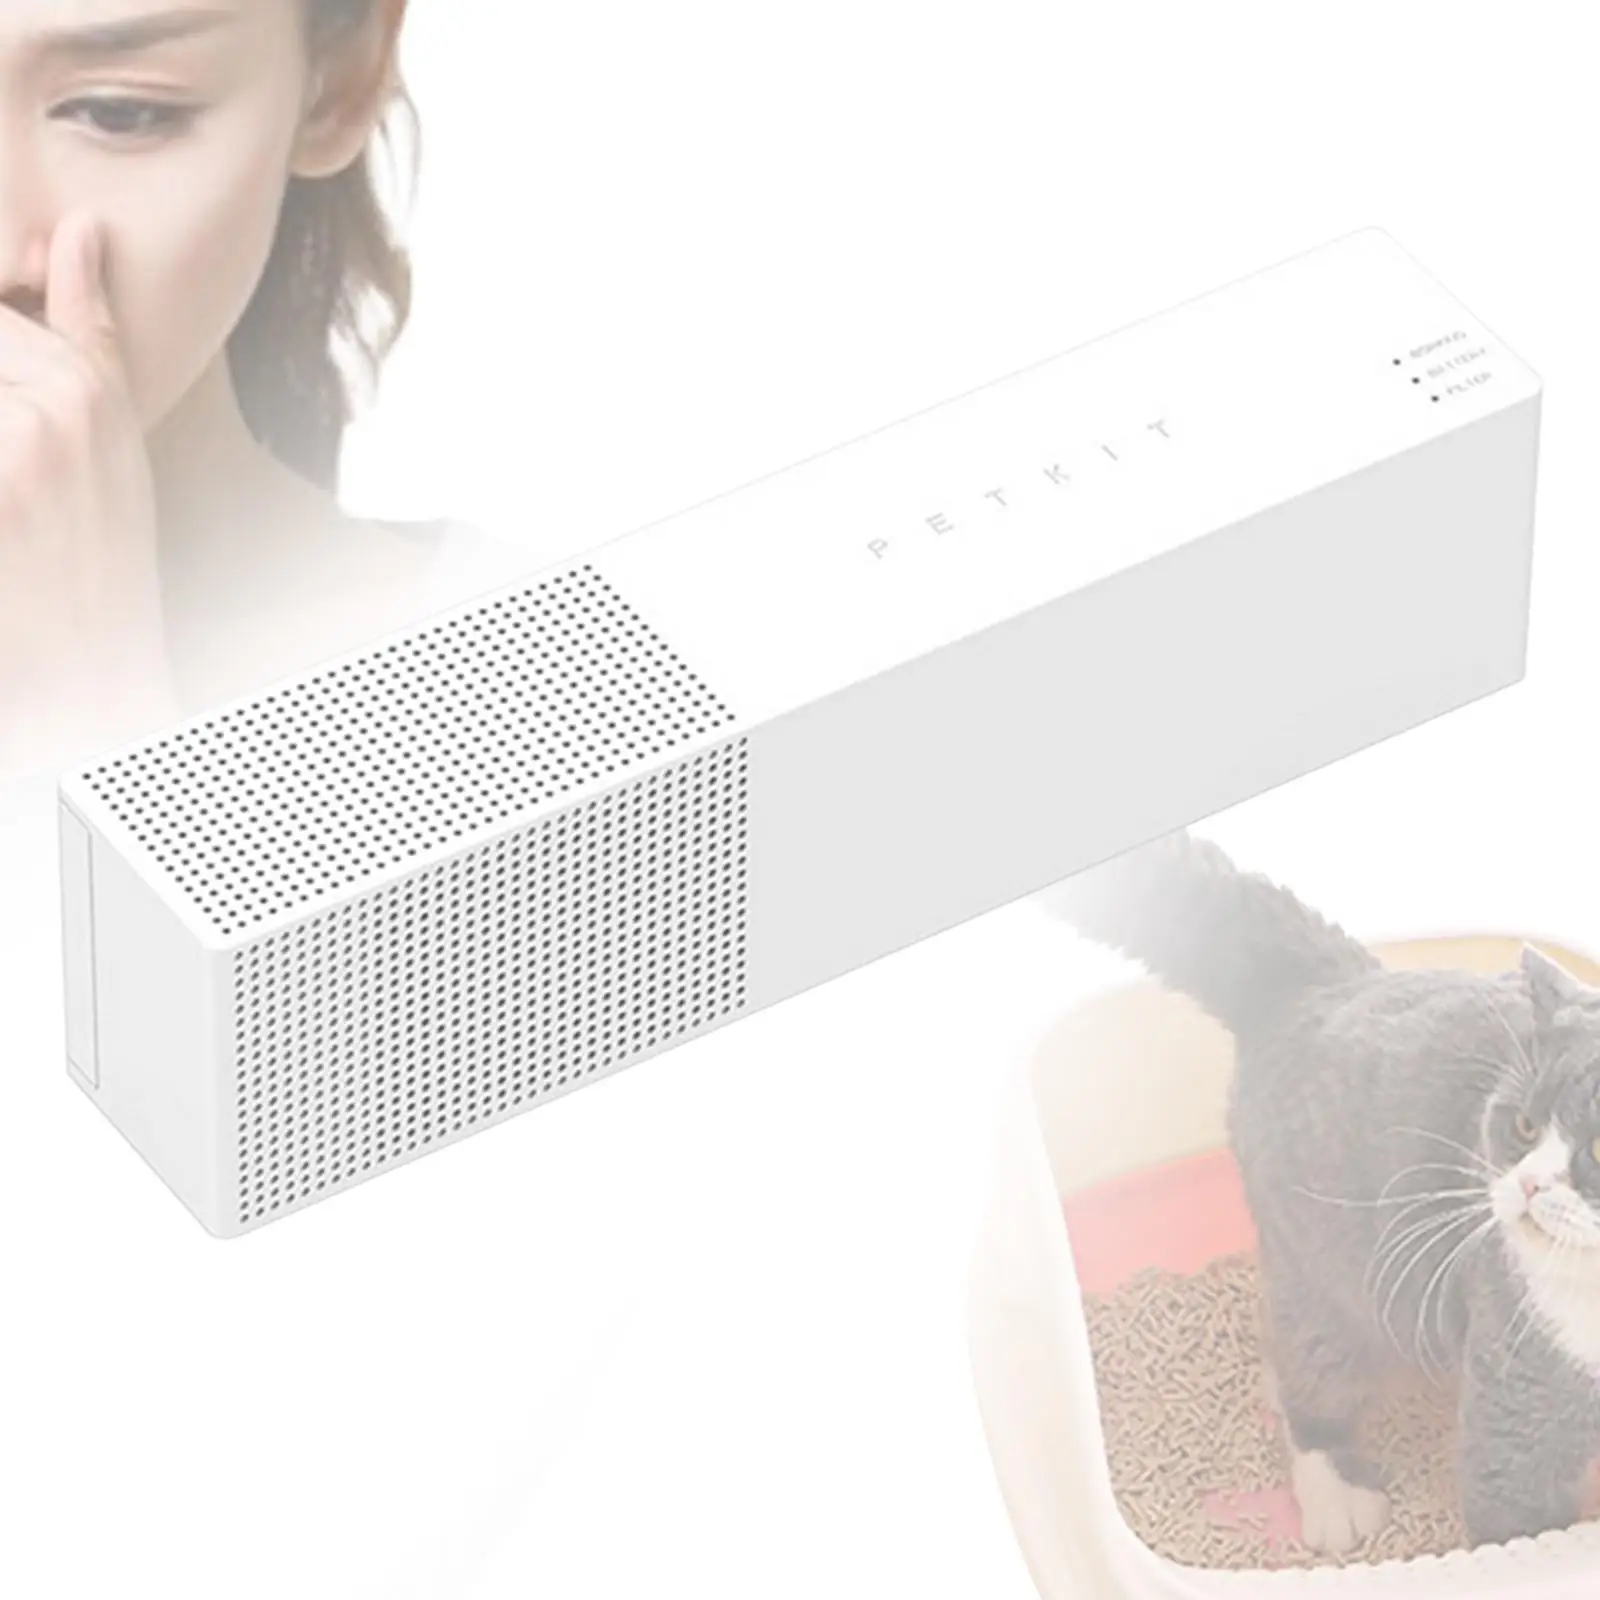 Cat Litter Odor Remover Wall Mounted Smart Cat Litter Freshener Portable Low Noise Cat Litter Deodorizer for Small Area Home